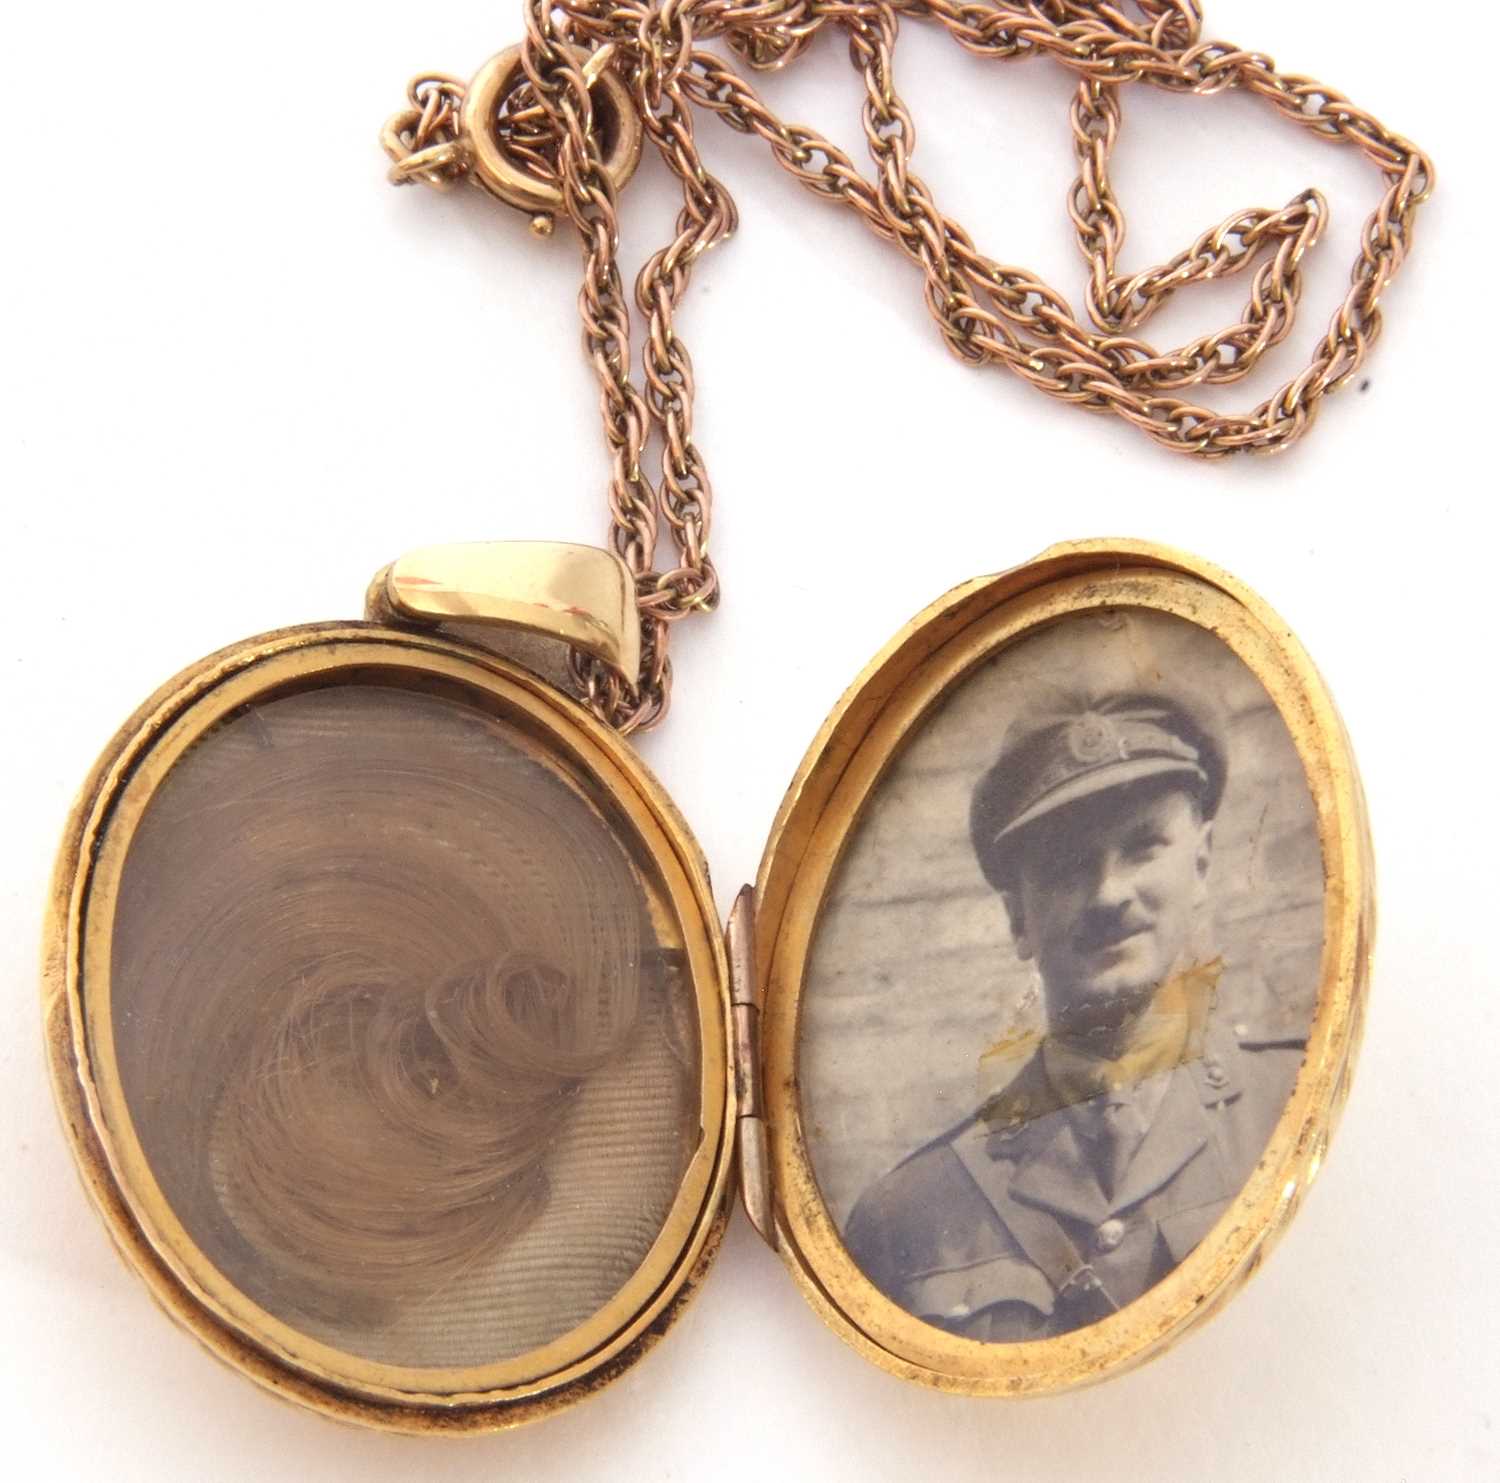 Gold back and fornt oval hinged locket engraved and chased both sides, 4 x 3cm, together with a - Image 3 of 3